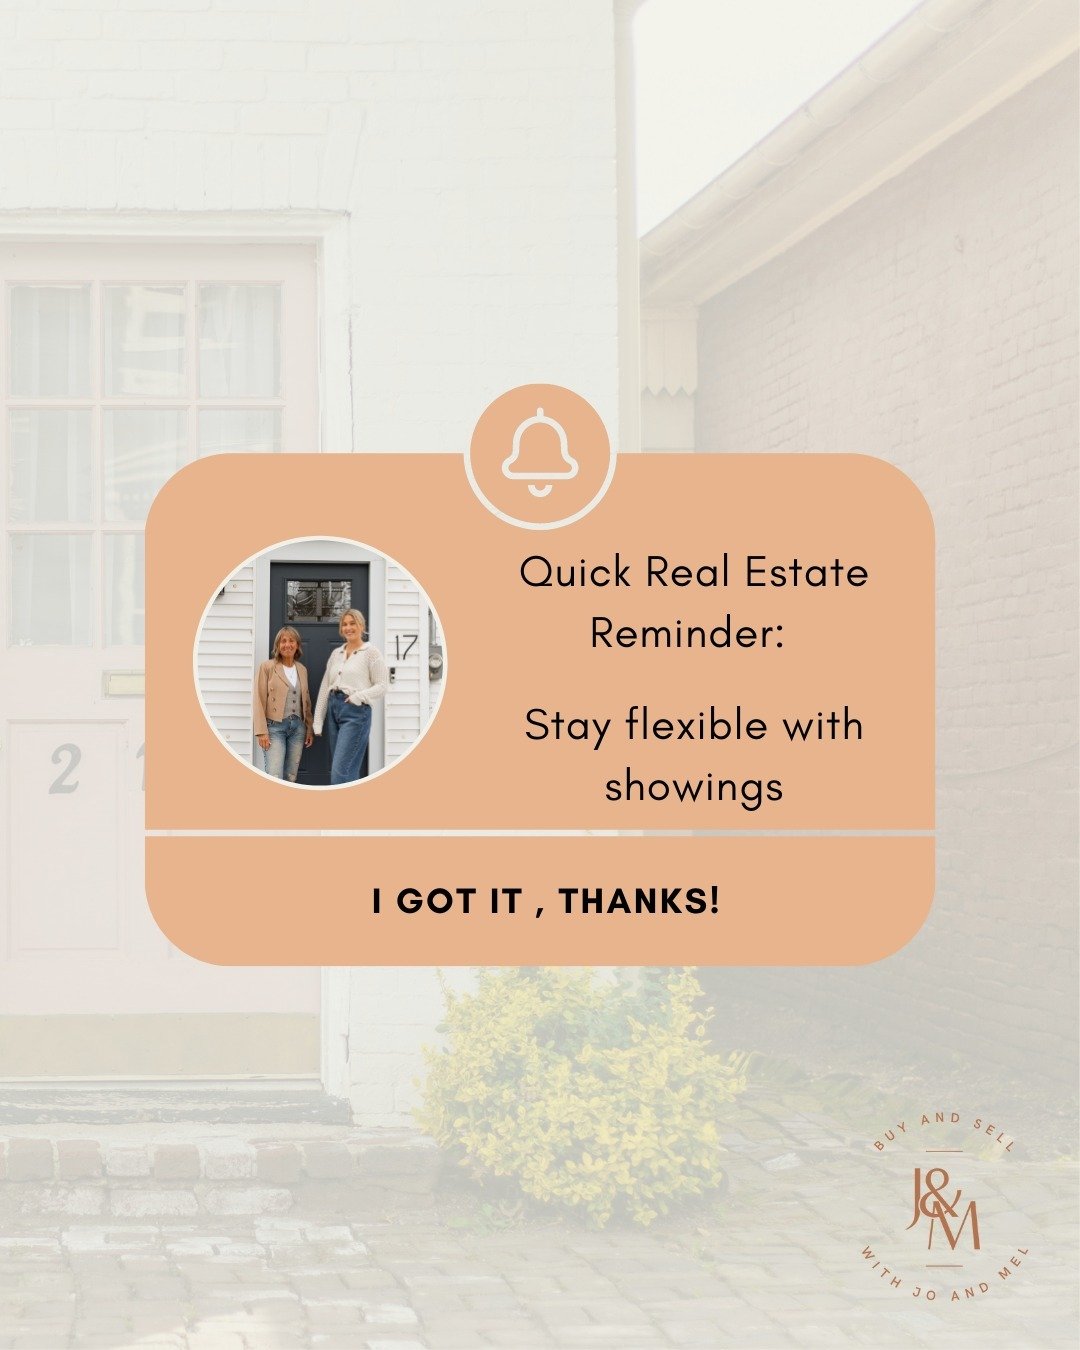 Remember, flexibility is key when selling your home! ✨ ⁠
⁠
Be open to accommodating showings at various times to welcome more potential buyers through your door. Evenings &amp; weekends matter but so do all other hours that you can accommodate. ⁠
⁠
E